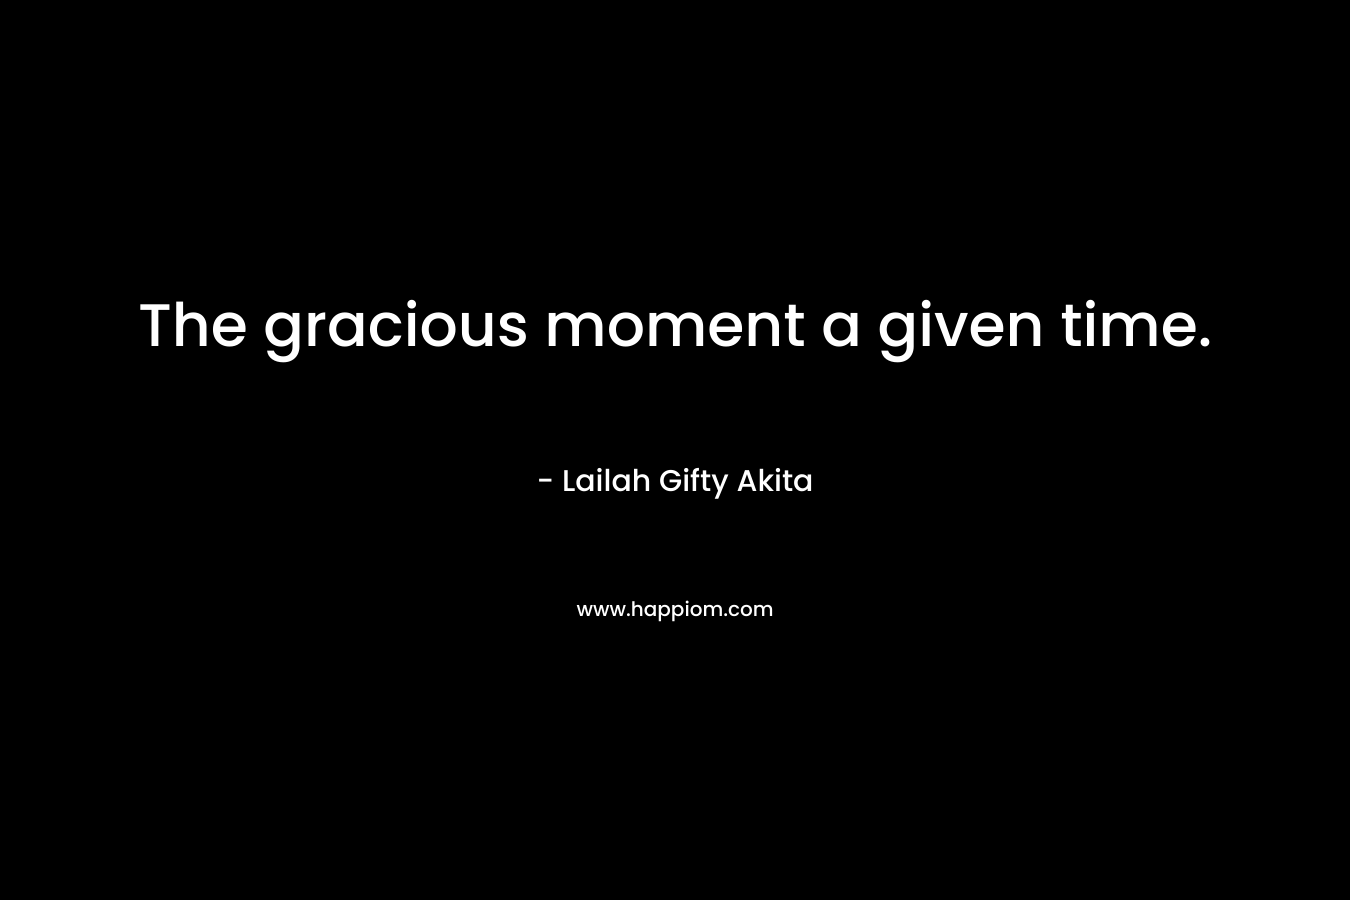 The gracious moment a given time.